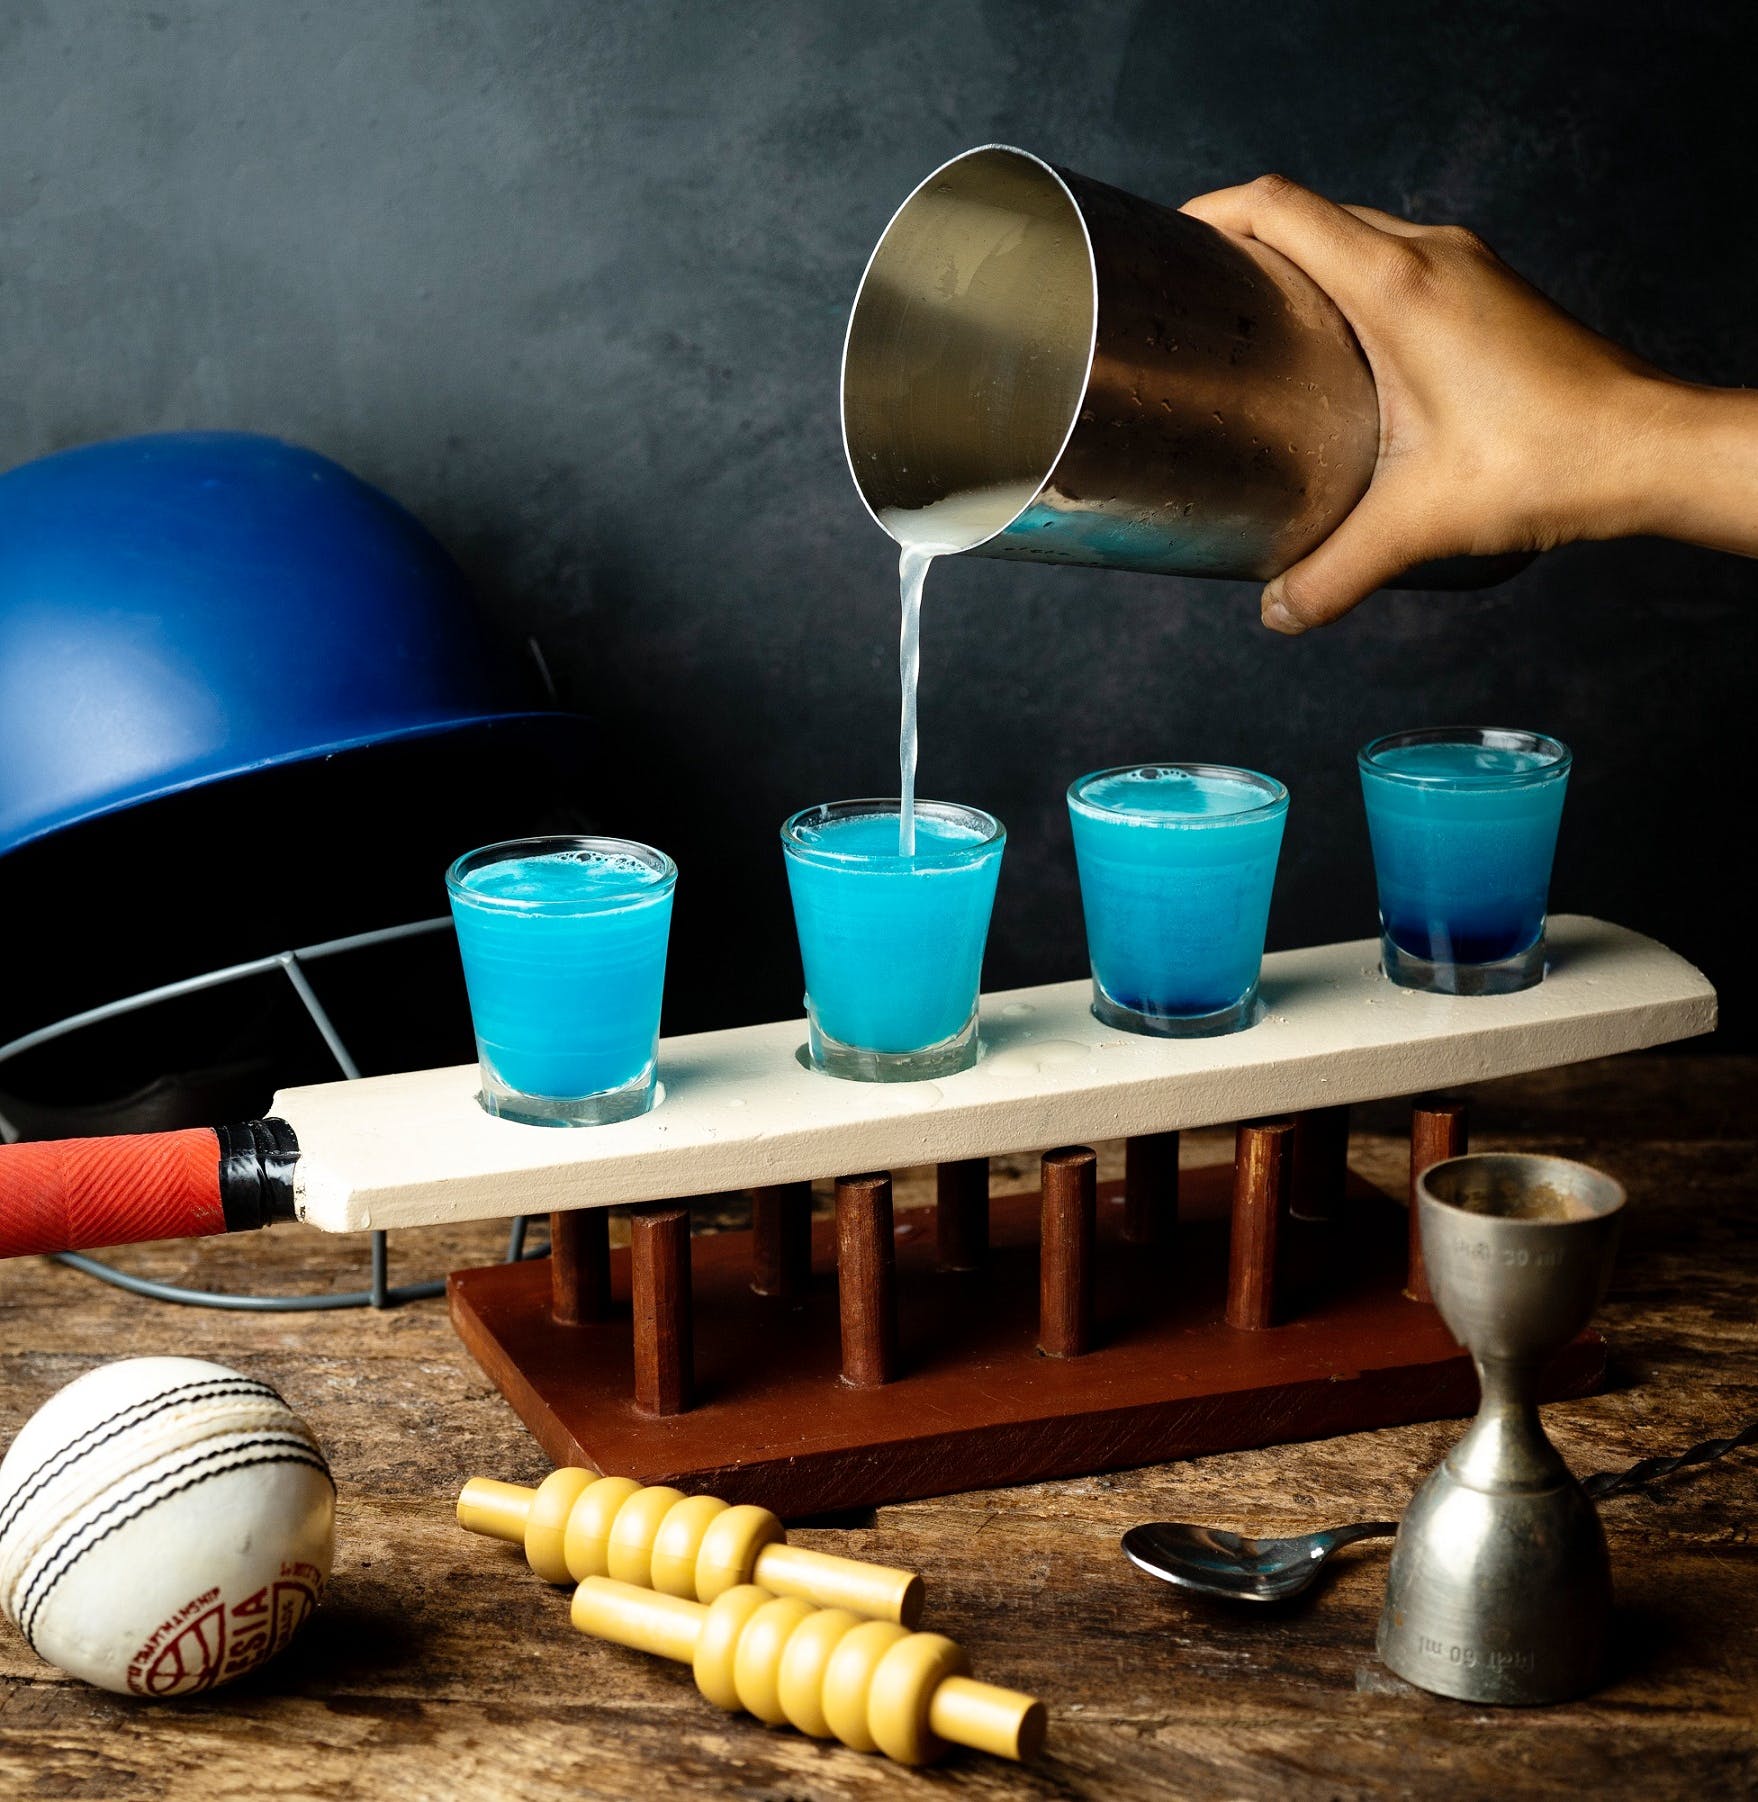 Blue,Turquoise,Still life photography,Gas,Still life,Tableware